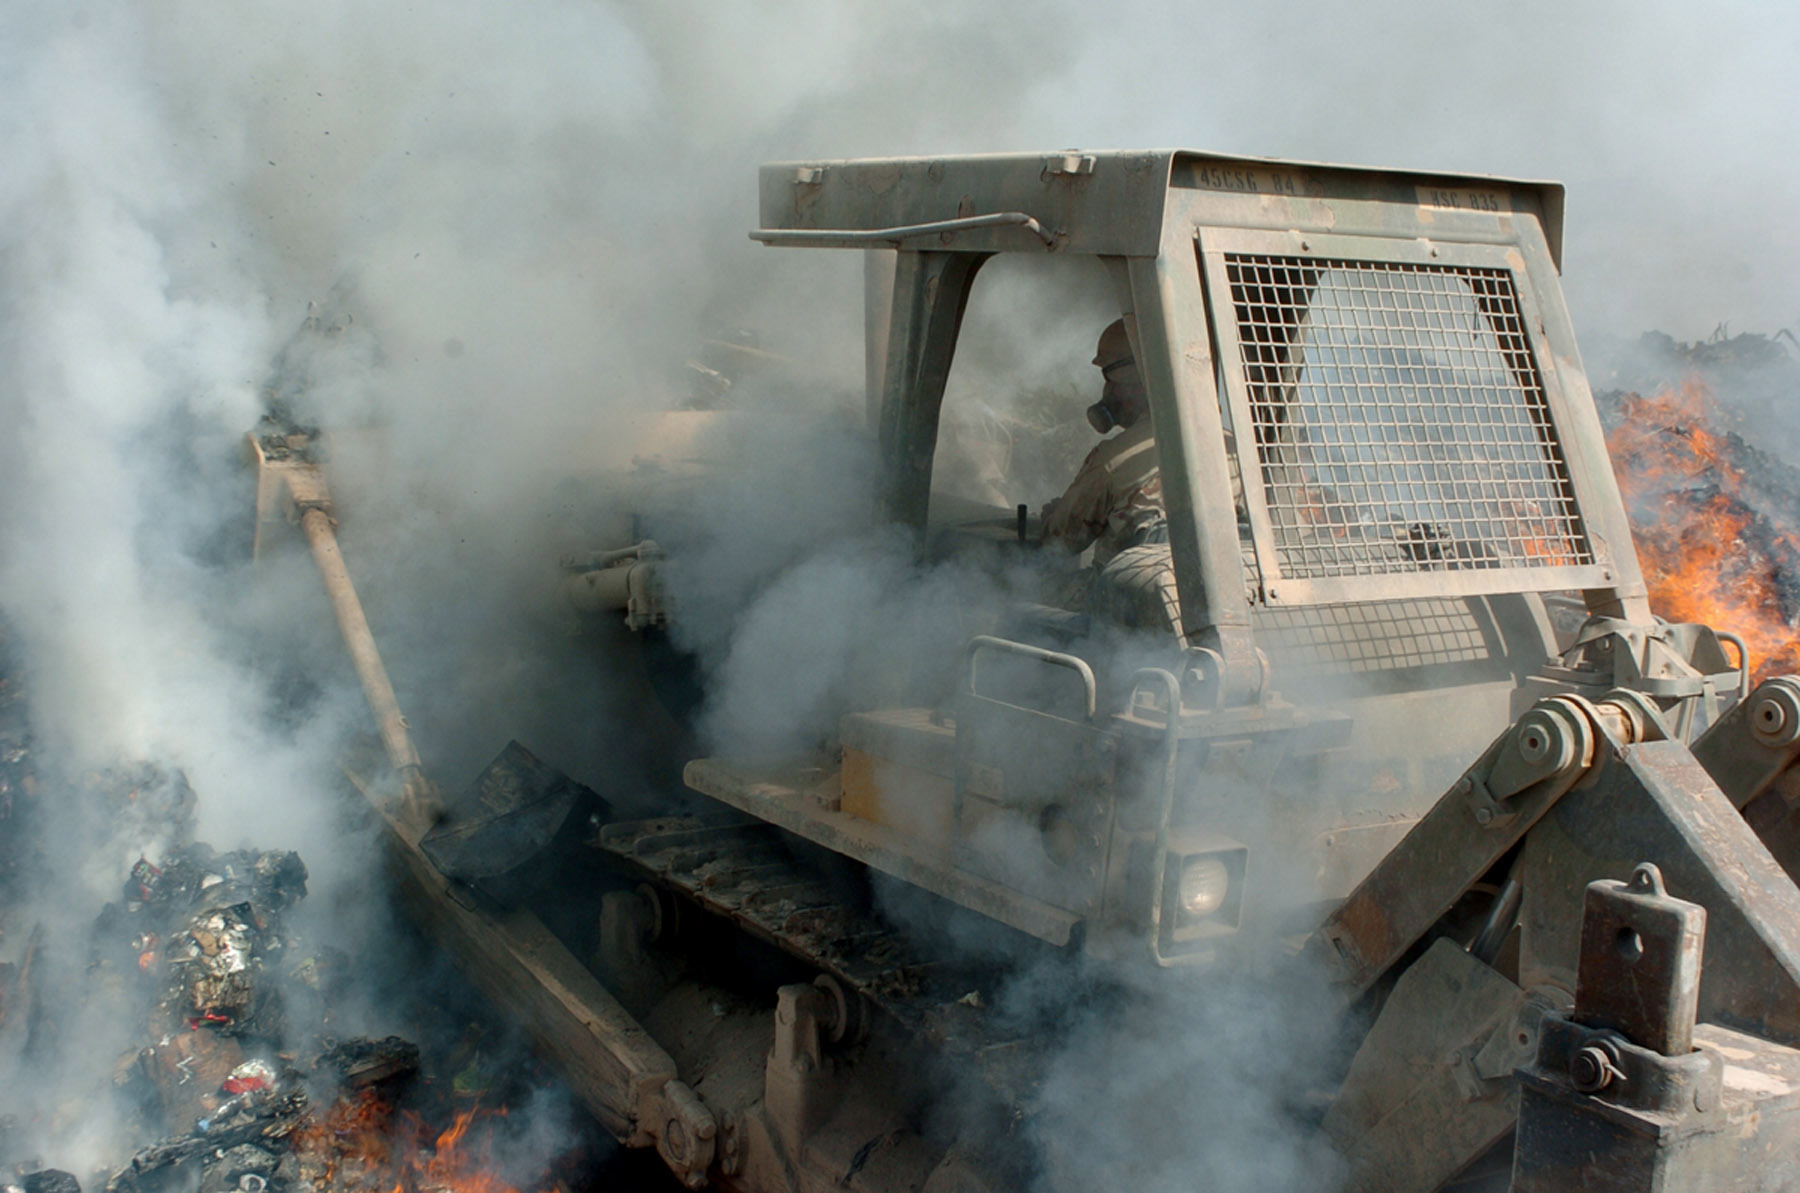 PHOTO: Smoke billows in from all sides as a member of the U.S. military pushes a bulldozer deep into the flames of a burn pit to keep burnable items constantly ablaze, at Balad Air Base in Iraq, Sept. 24, 2004.